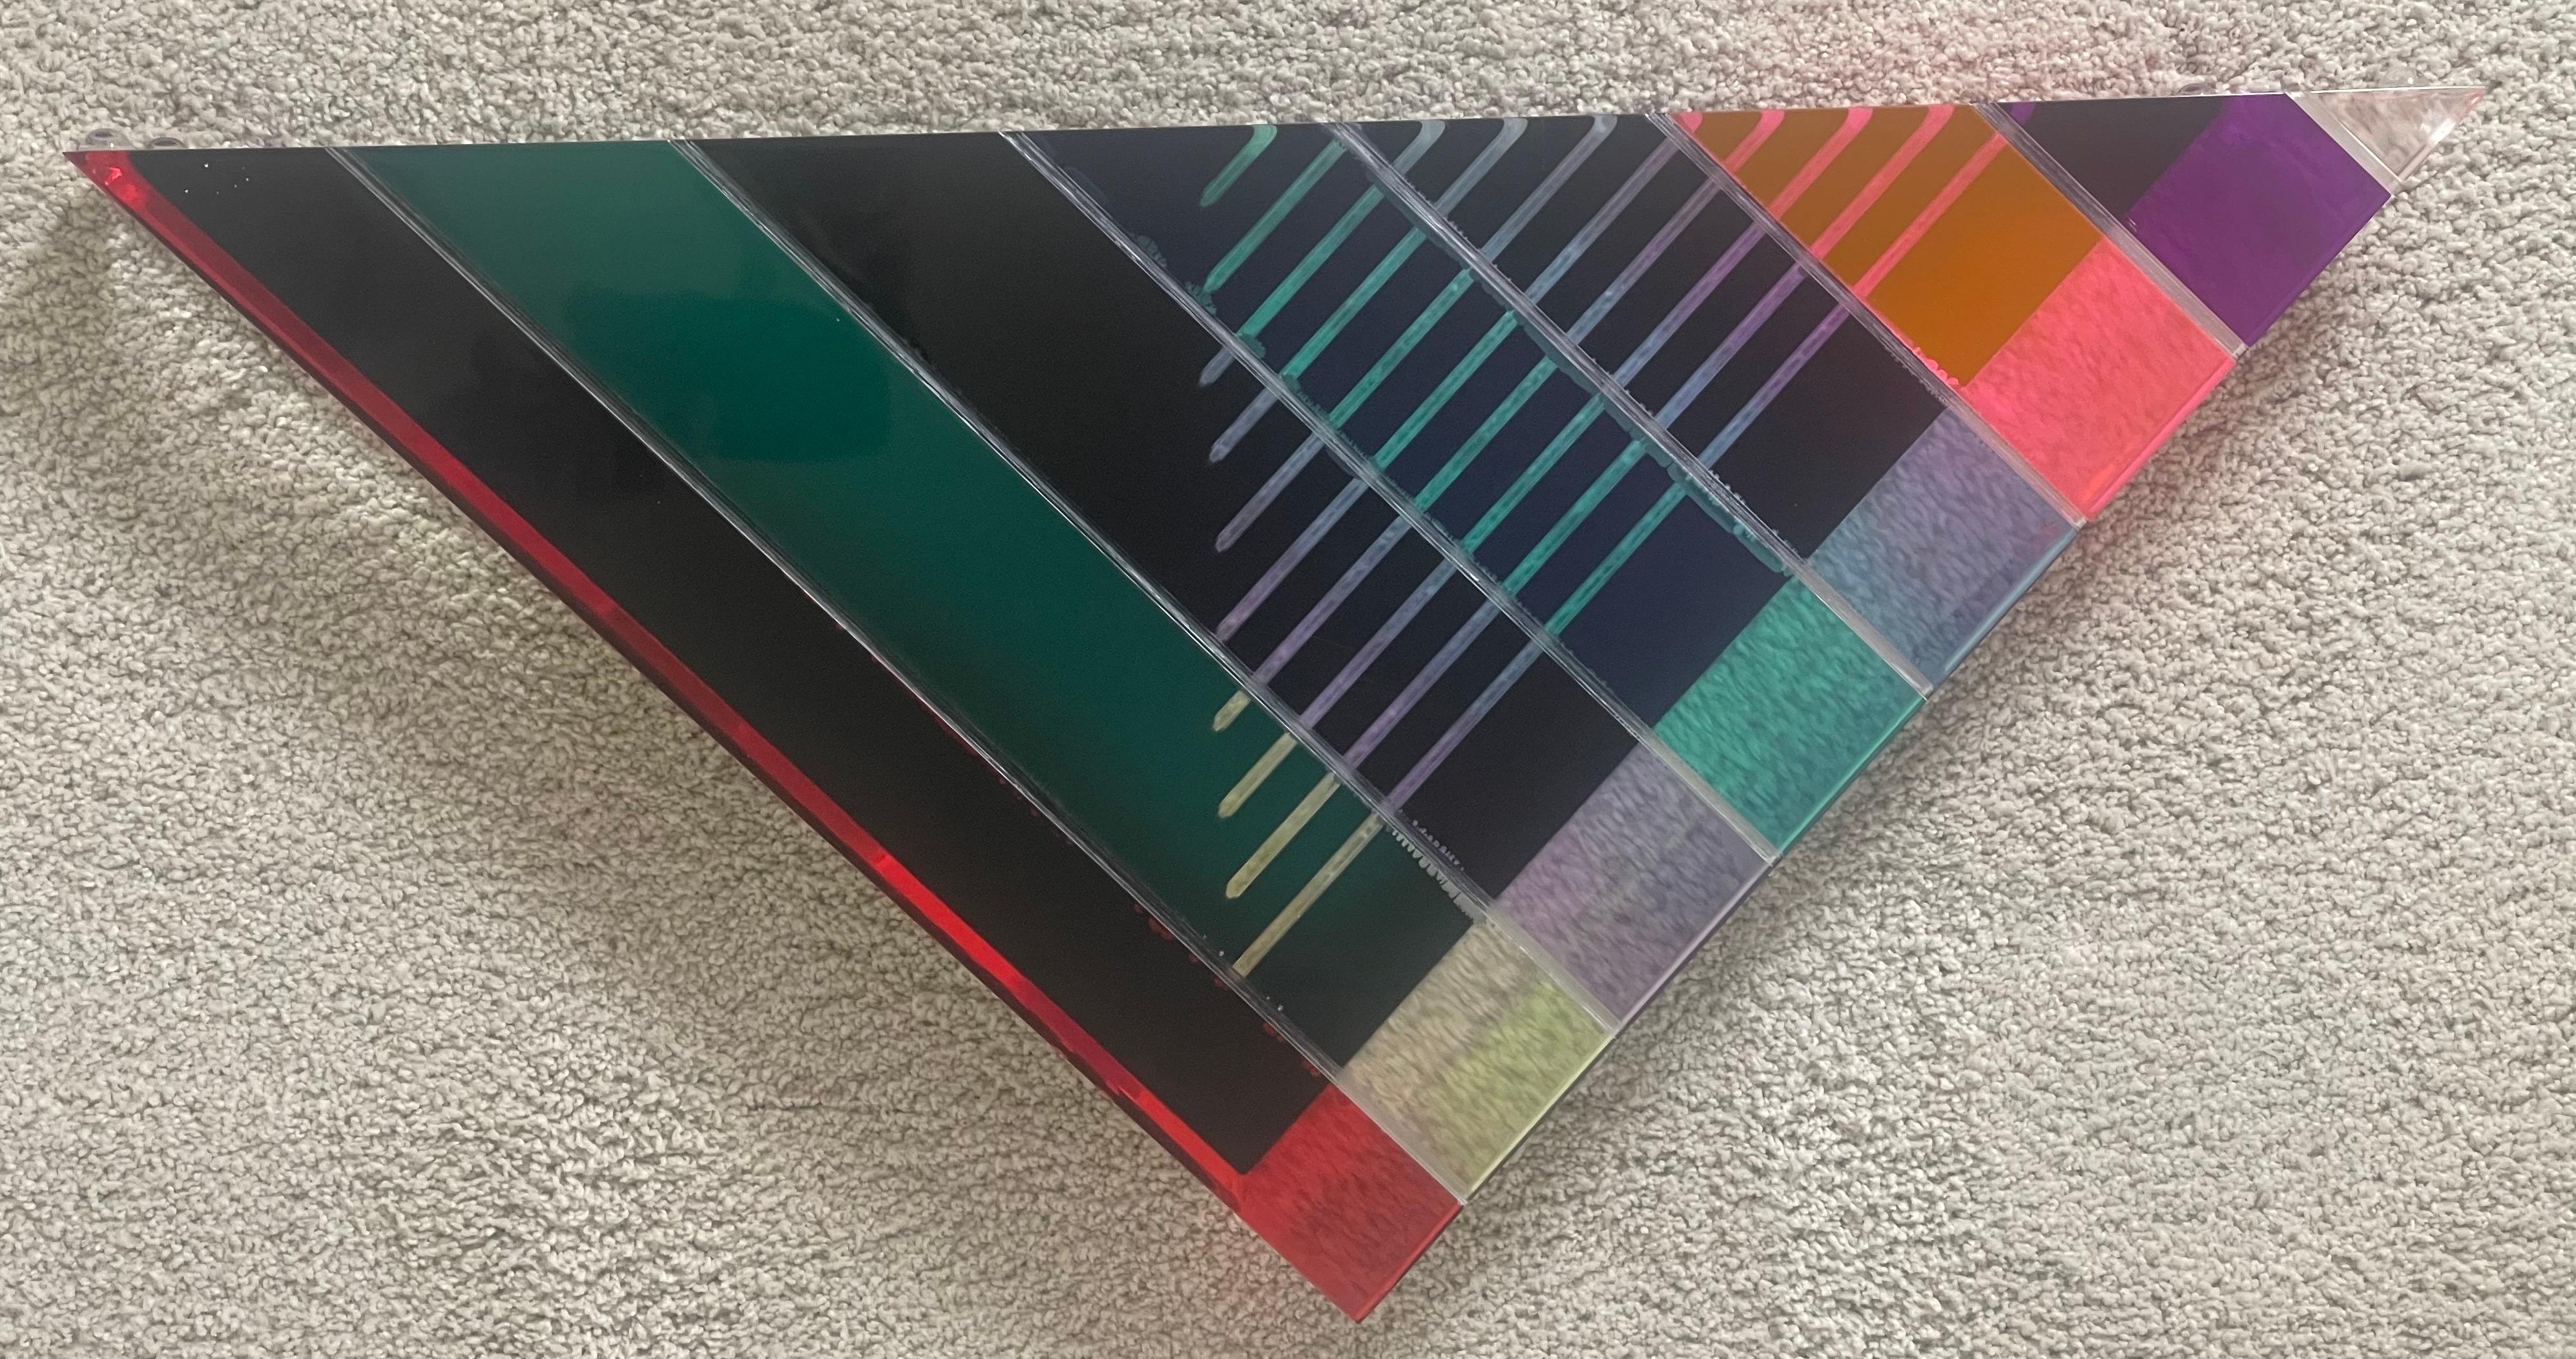 Post-Modern Large Colorful Triangular Lucite Sculpture by Shlomi Haziza